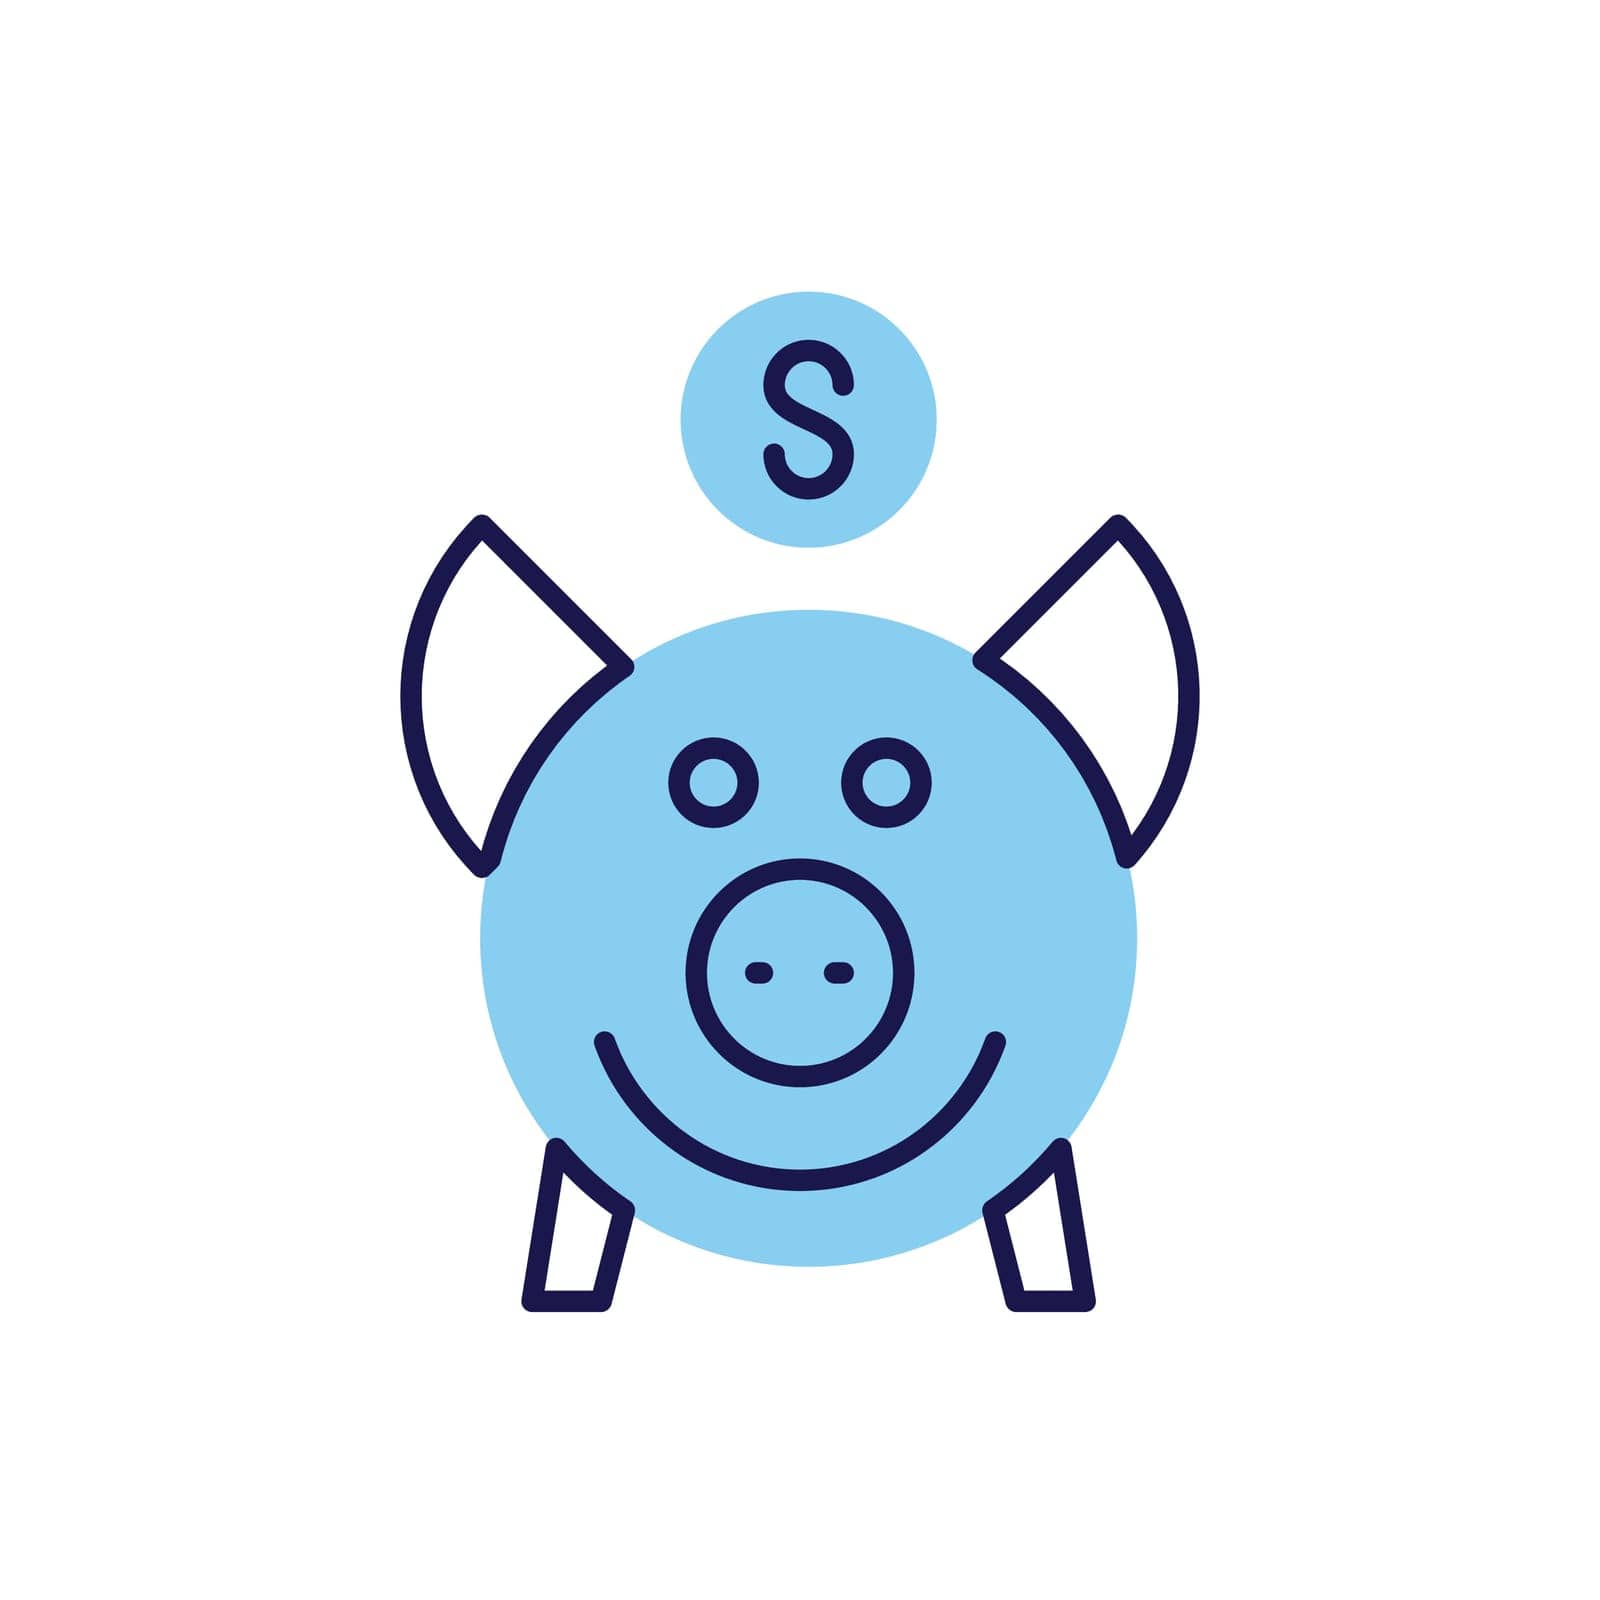 Piggy Bank related vector icon by smoki